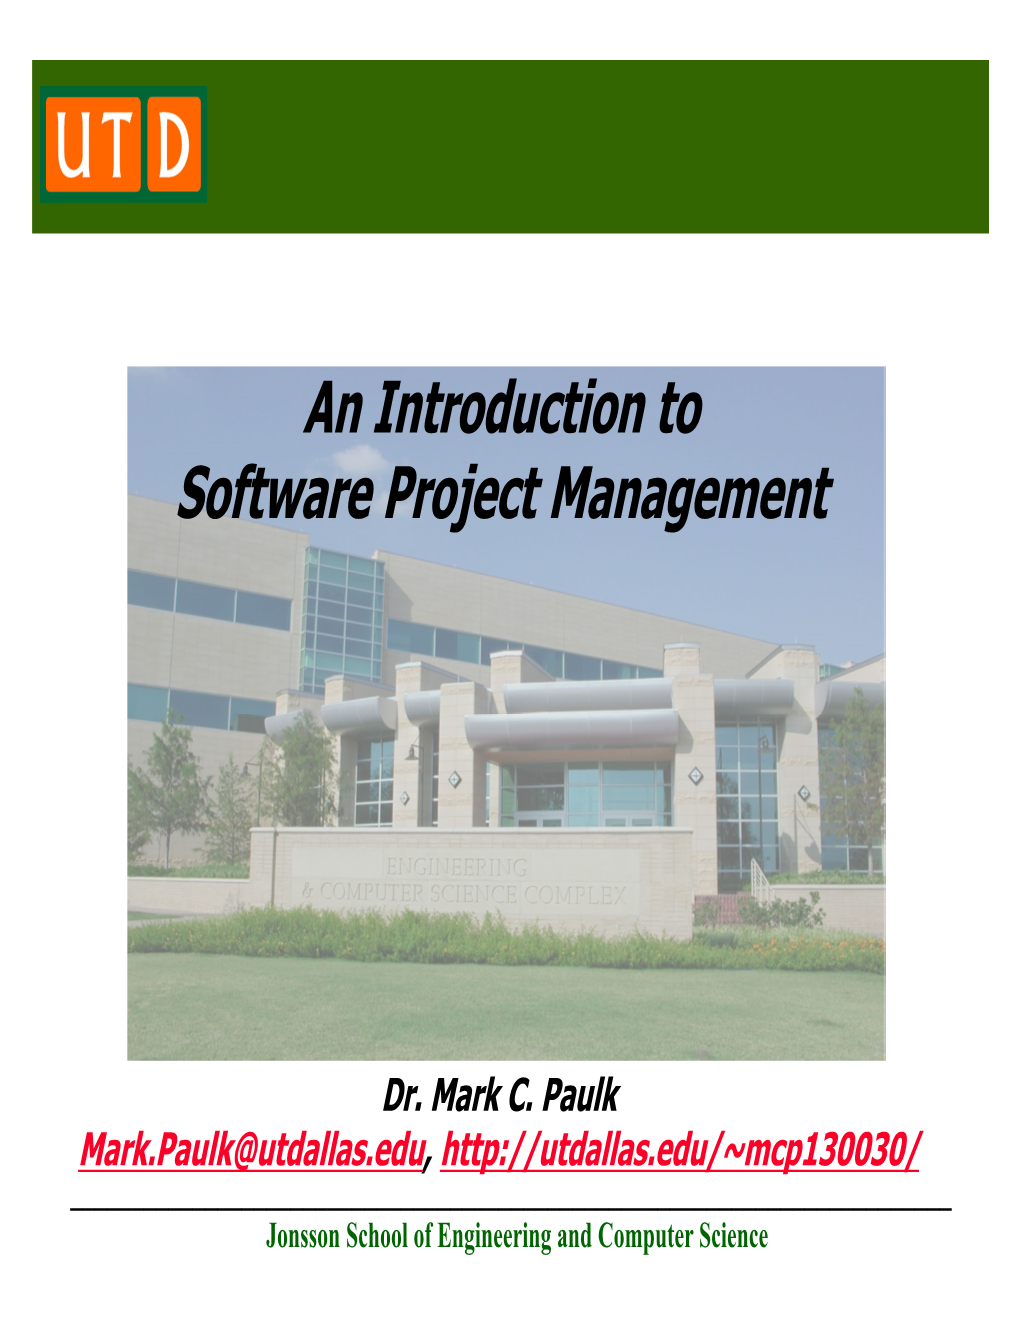 An Introduction to Software Project Management